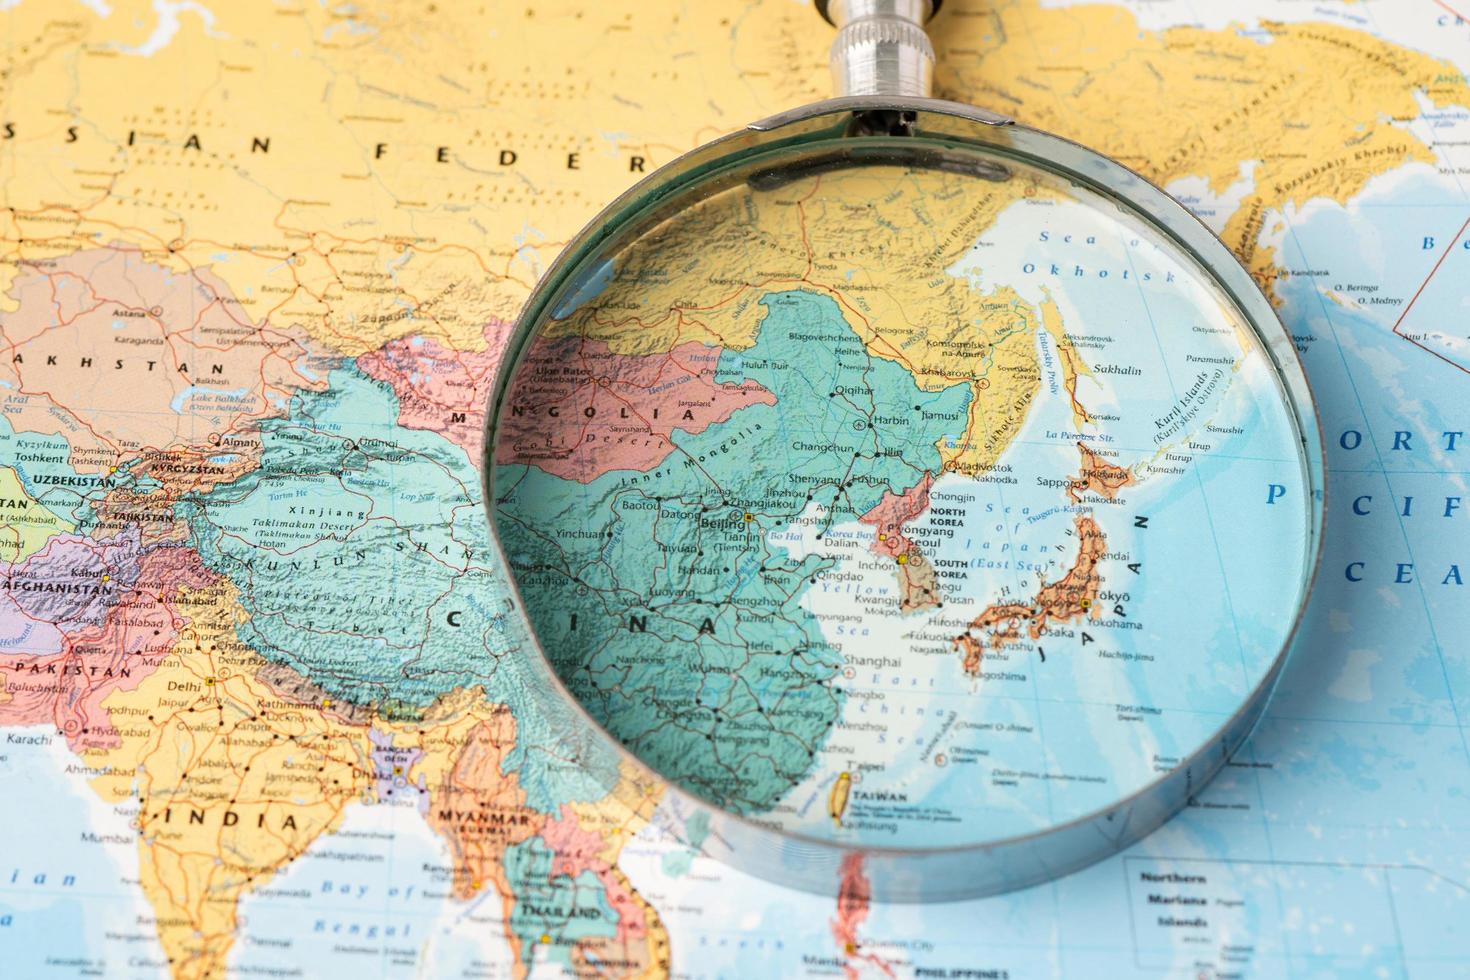 Bangkok, Thailand - January 20, 2022 Japan, Magnifying glass close up with colorful world map, travel, geography, tourism and exploration concept. photo